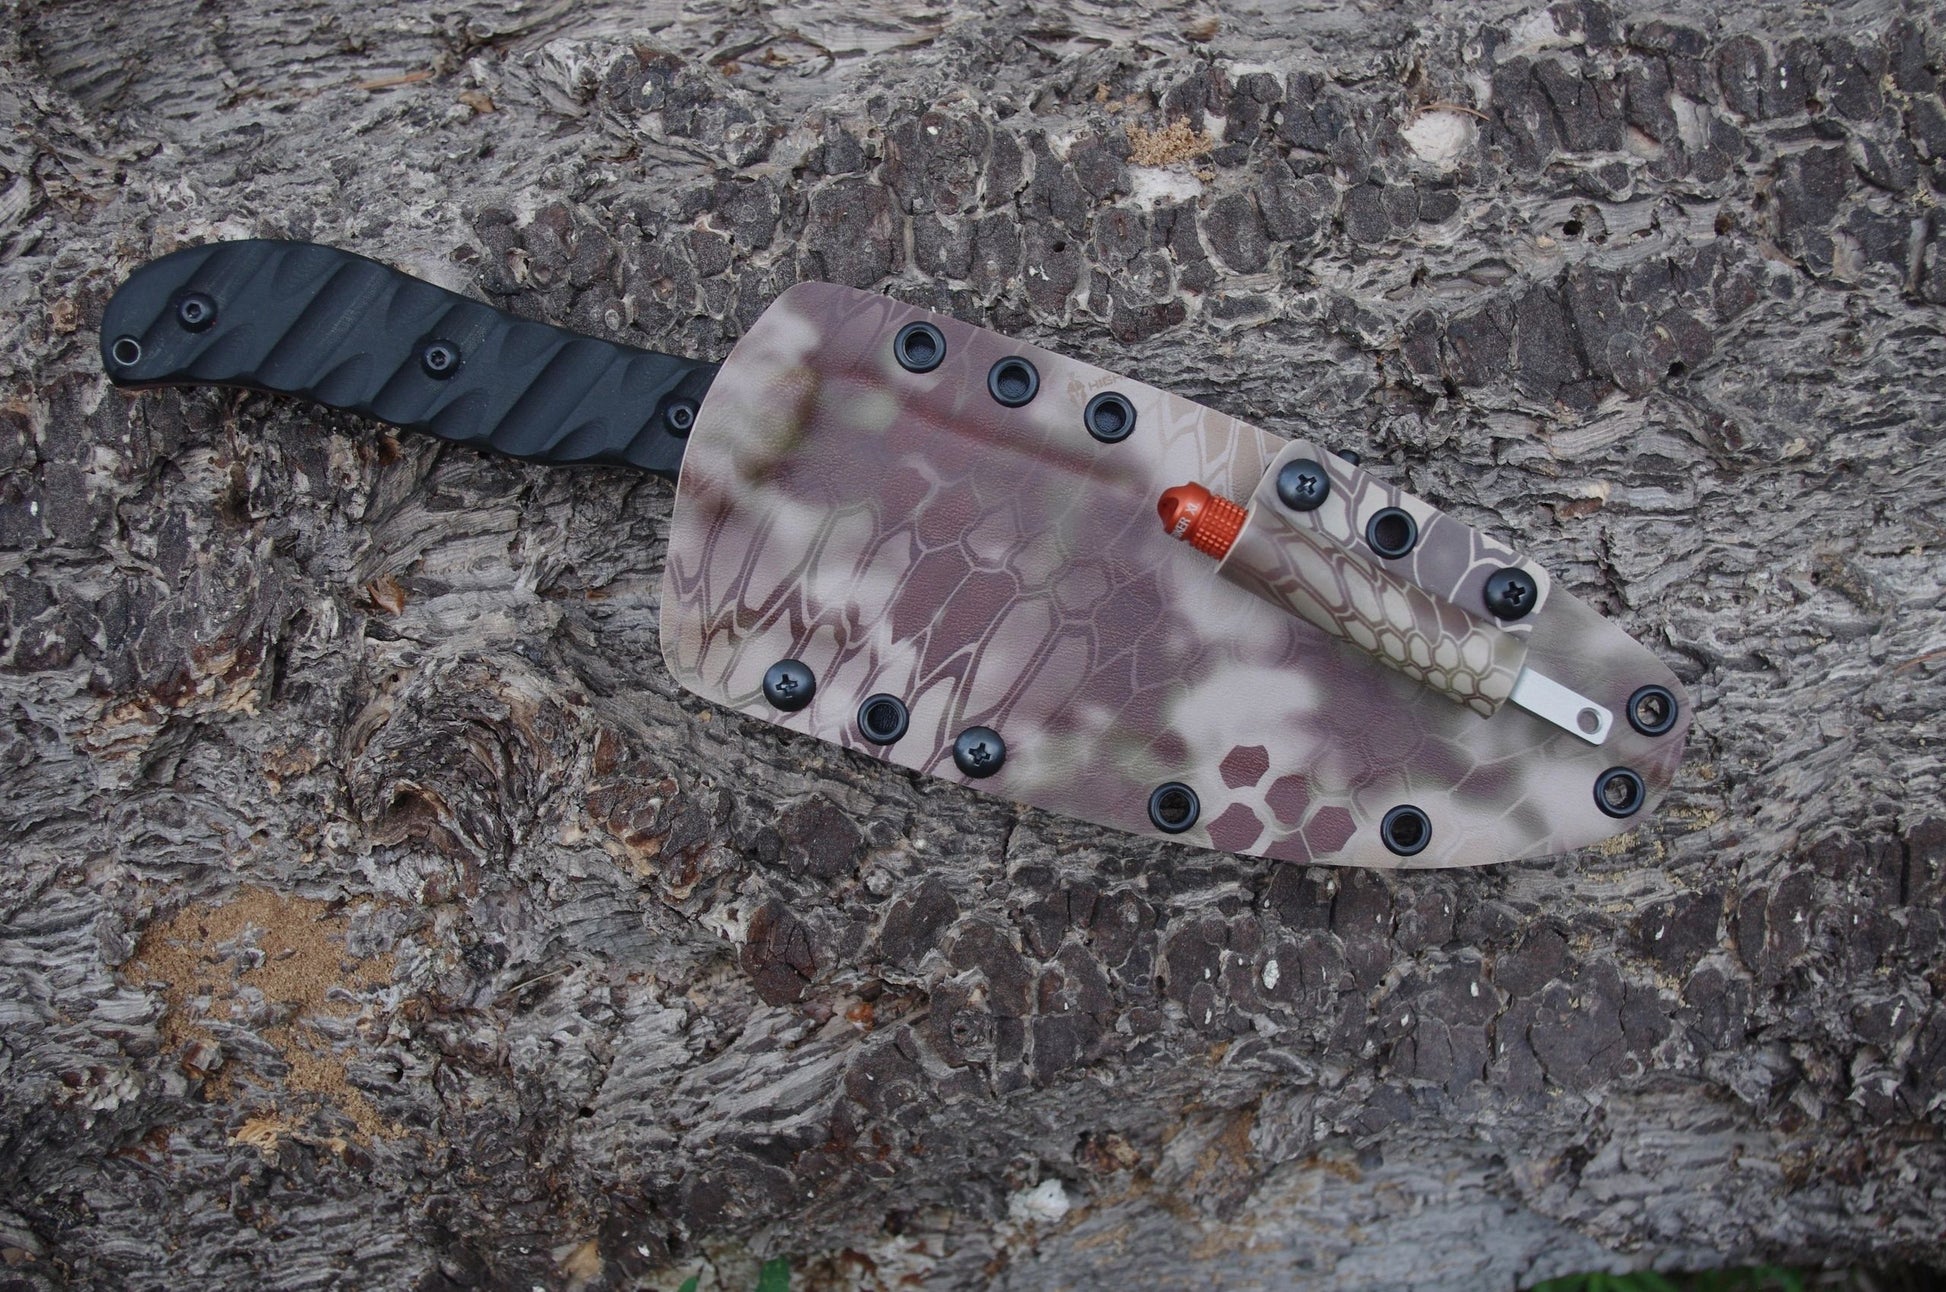 TOPS KNIVES SILENT HERO CUSTOM KYDEX SHEATH BUILT YOUR WAY (KNIFE NOT INCLUDED)